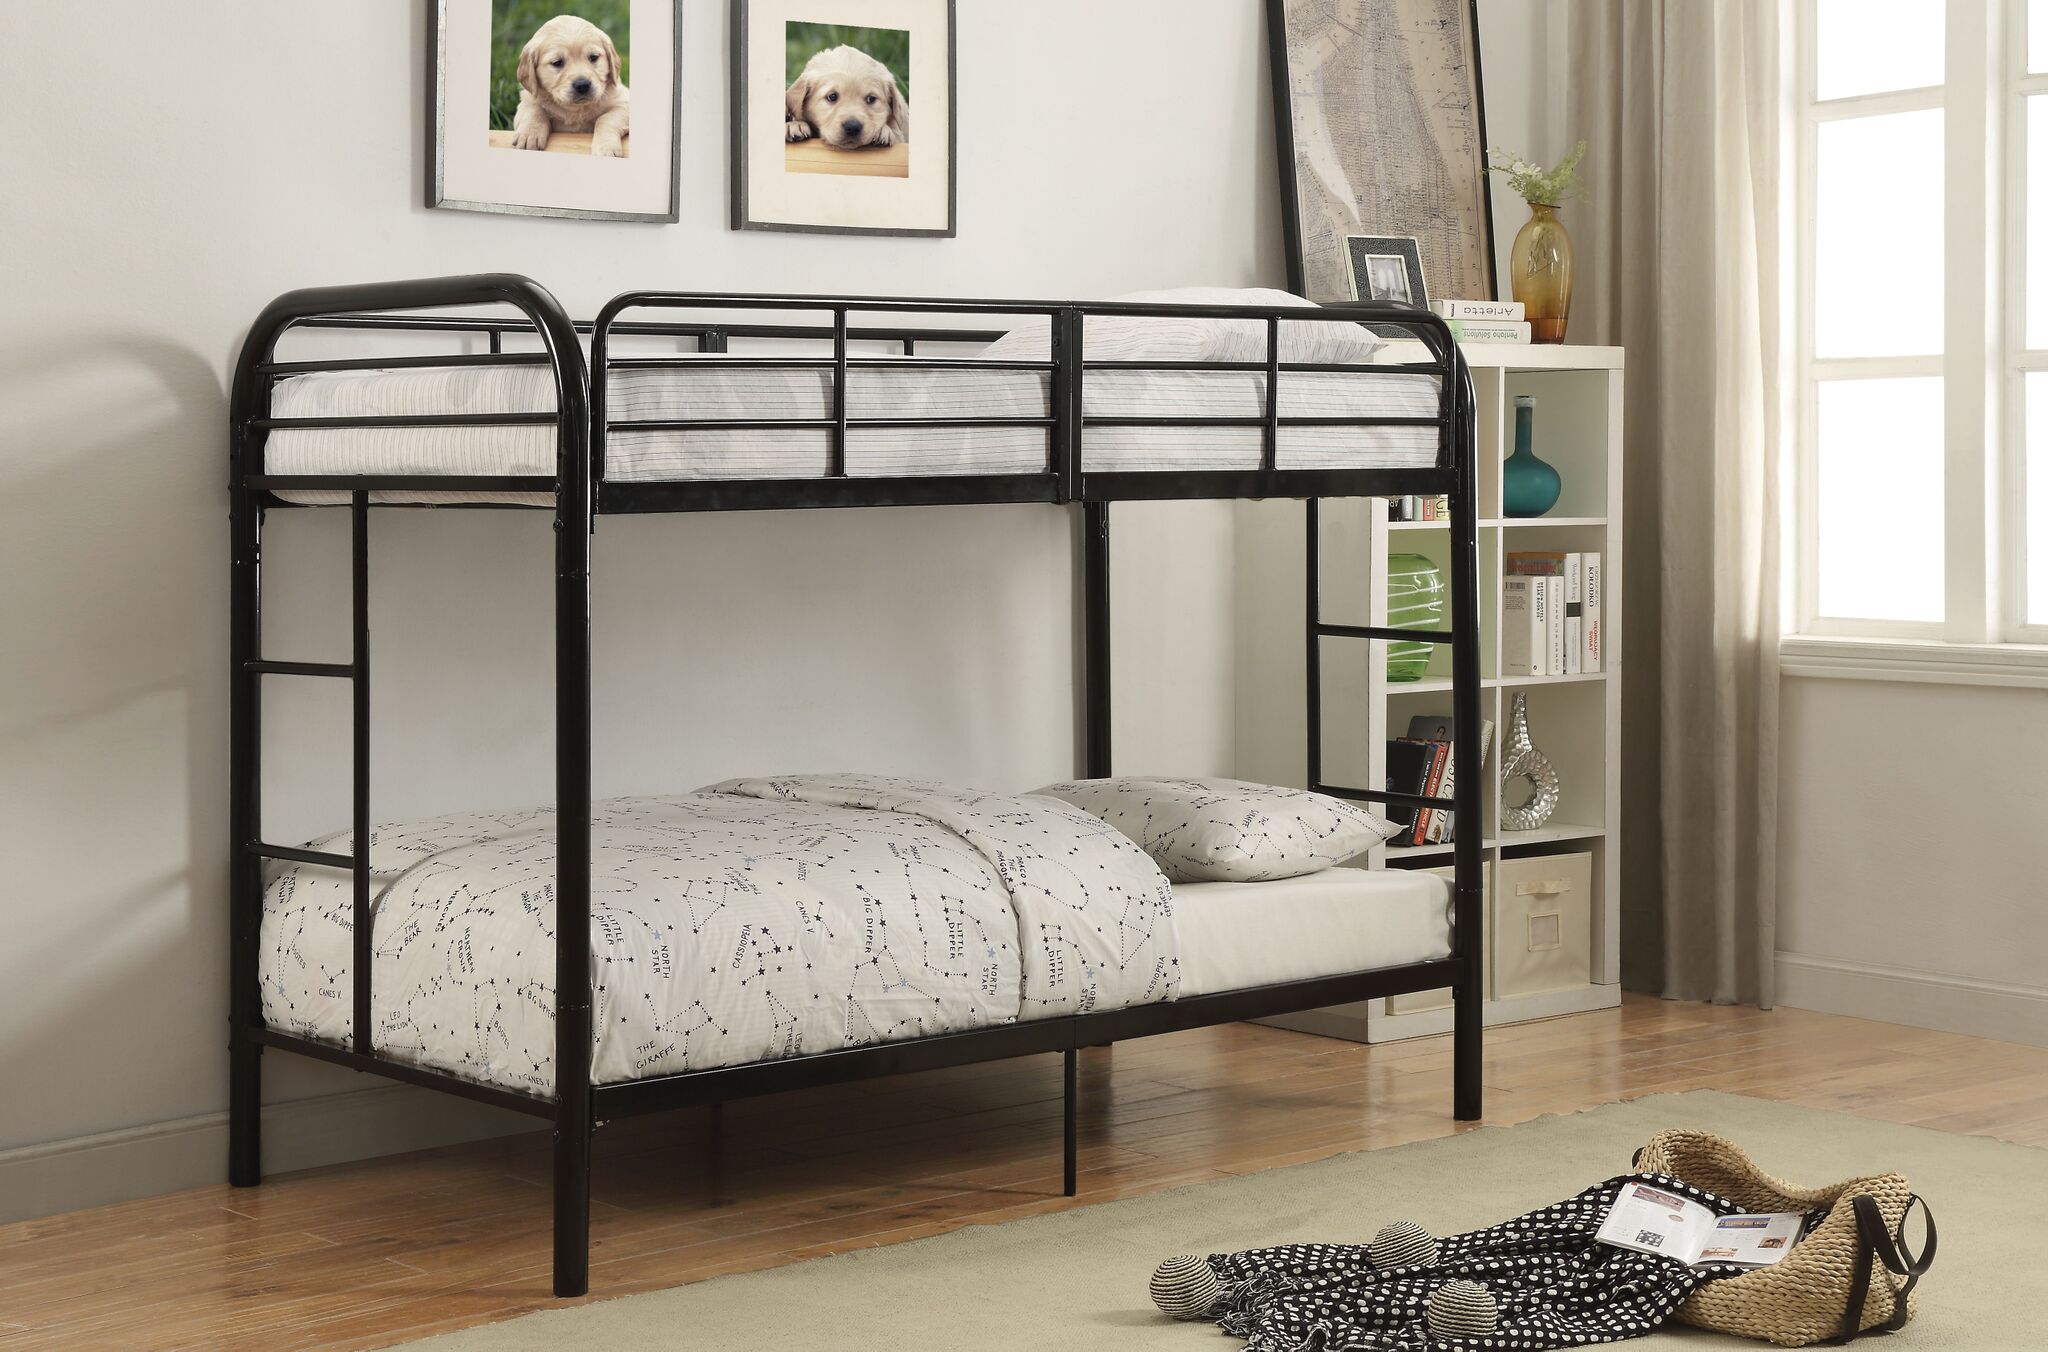 Thomas Twin Size Bunk Bed In Black, Thomas Bunk Bed